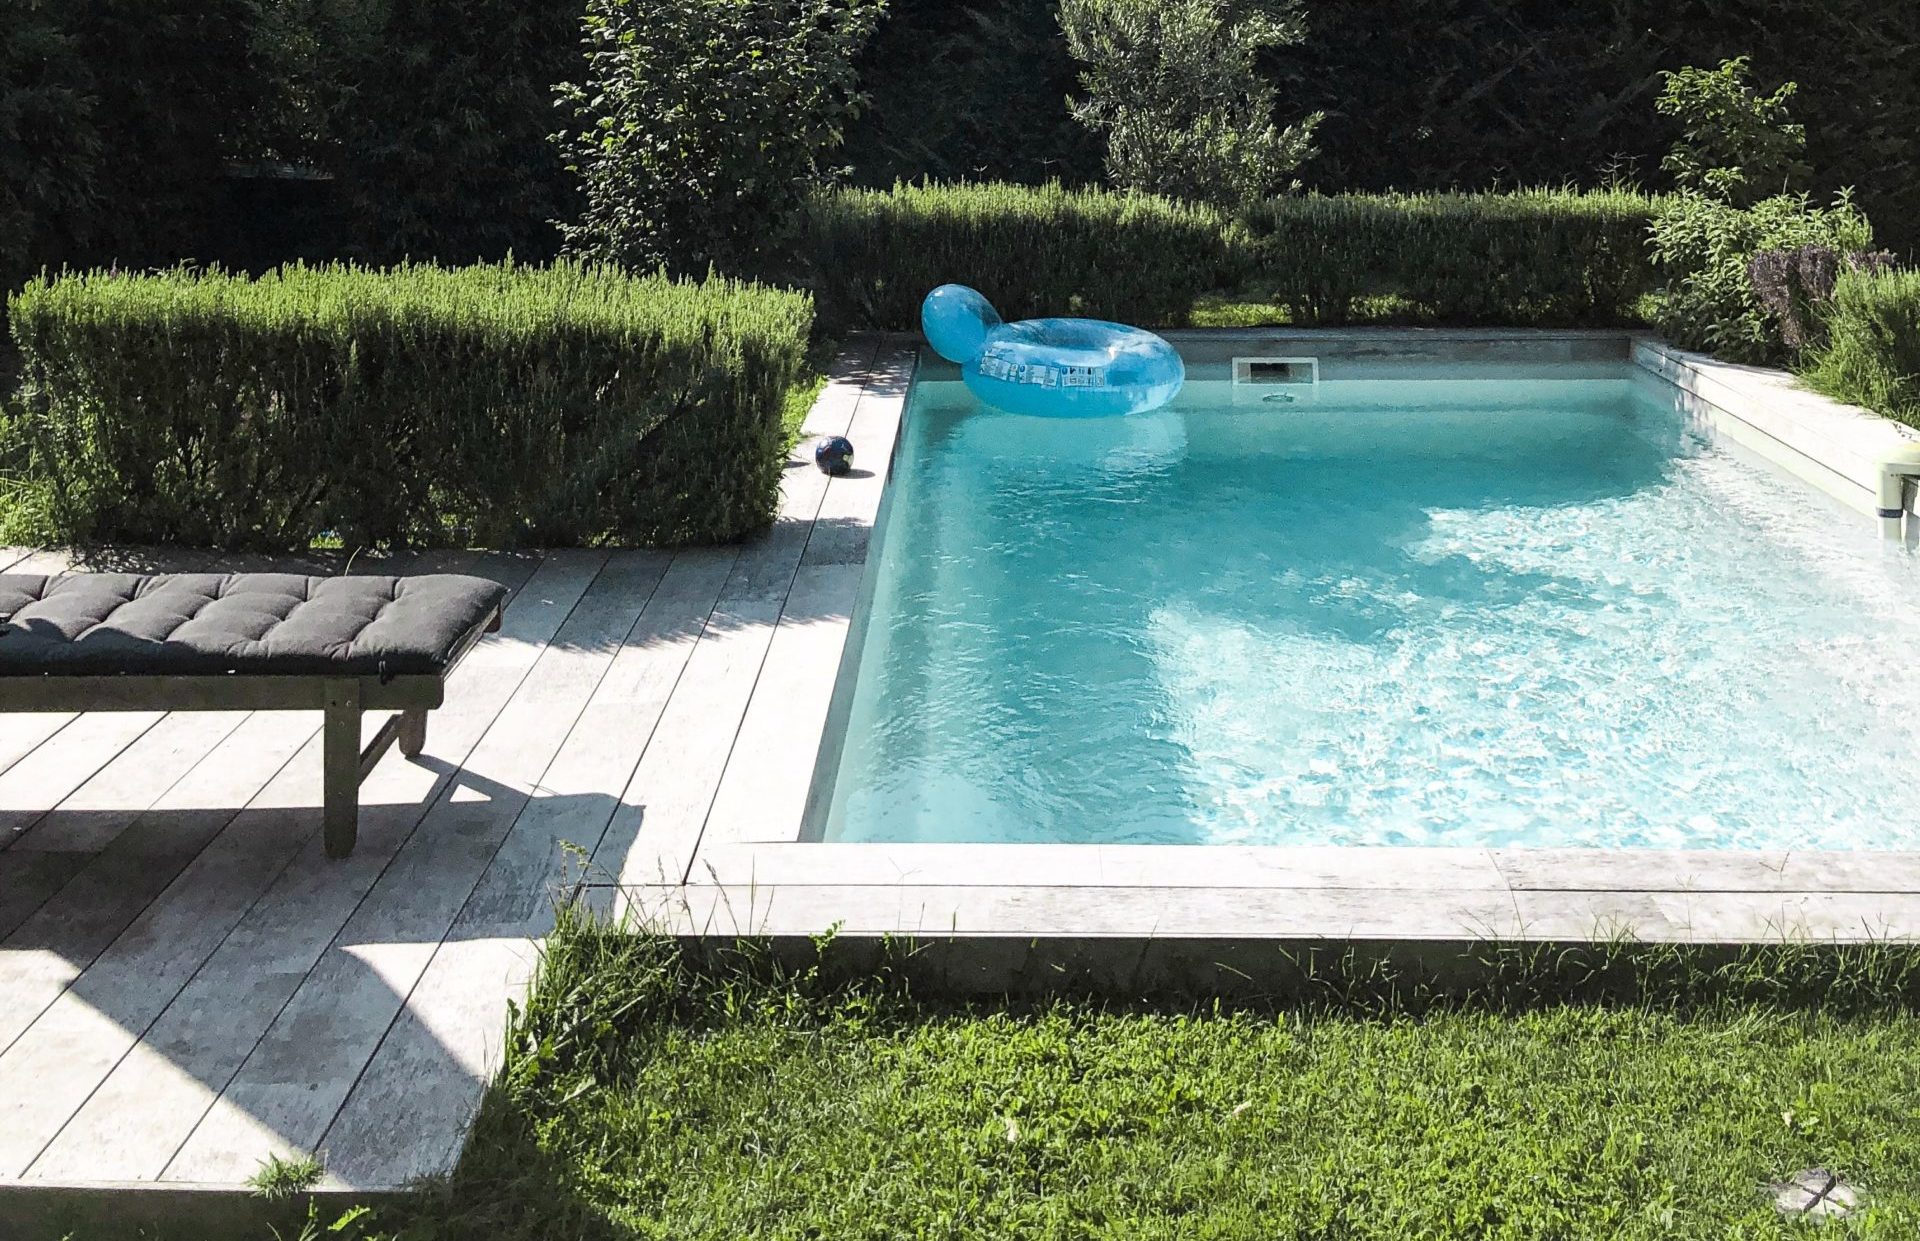 photo of a swimming pool near trees 2876789 scaled e1580874855686 - Marvel Pools